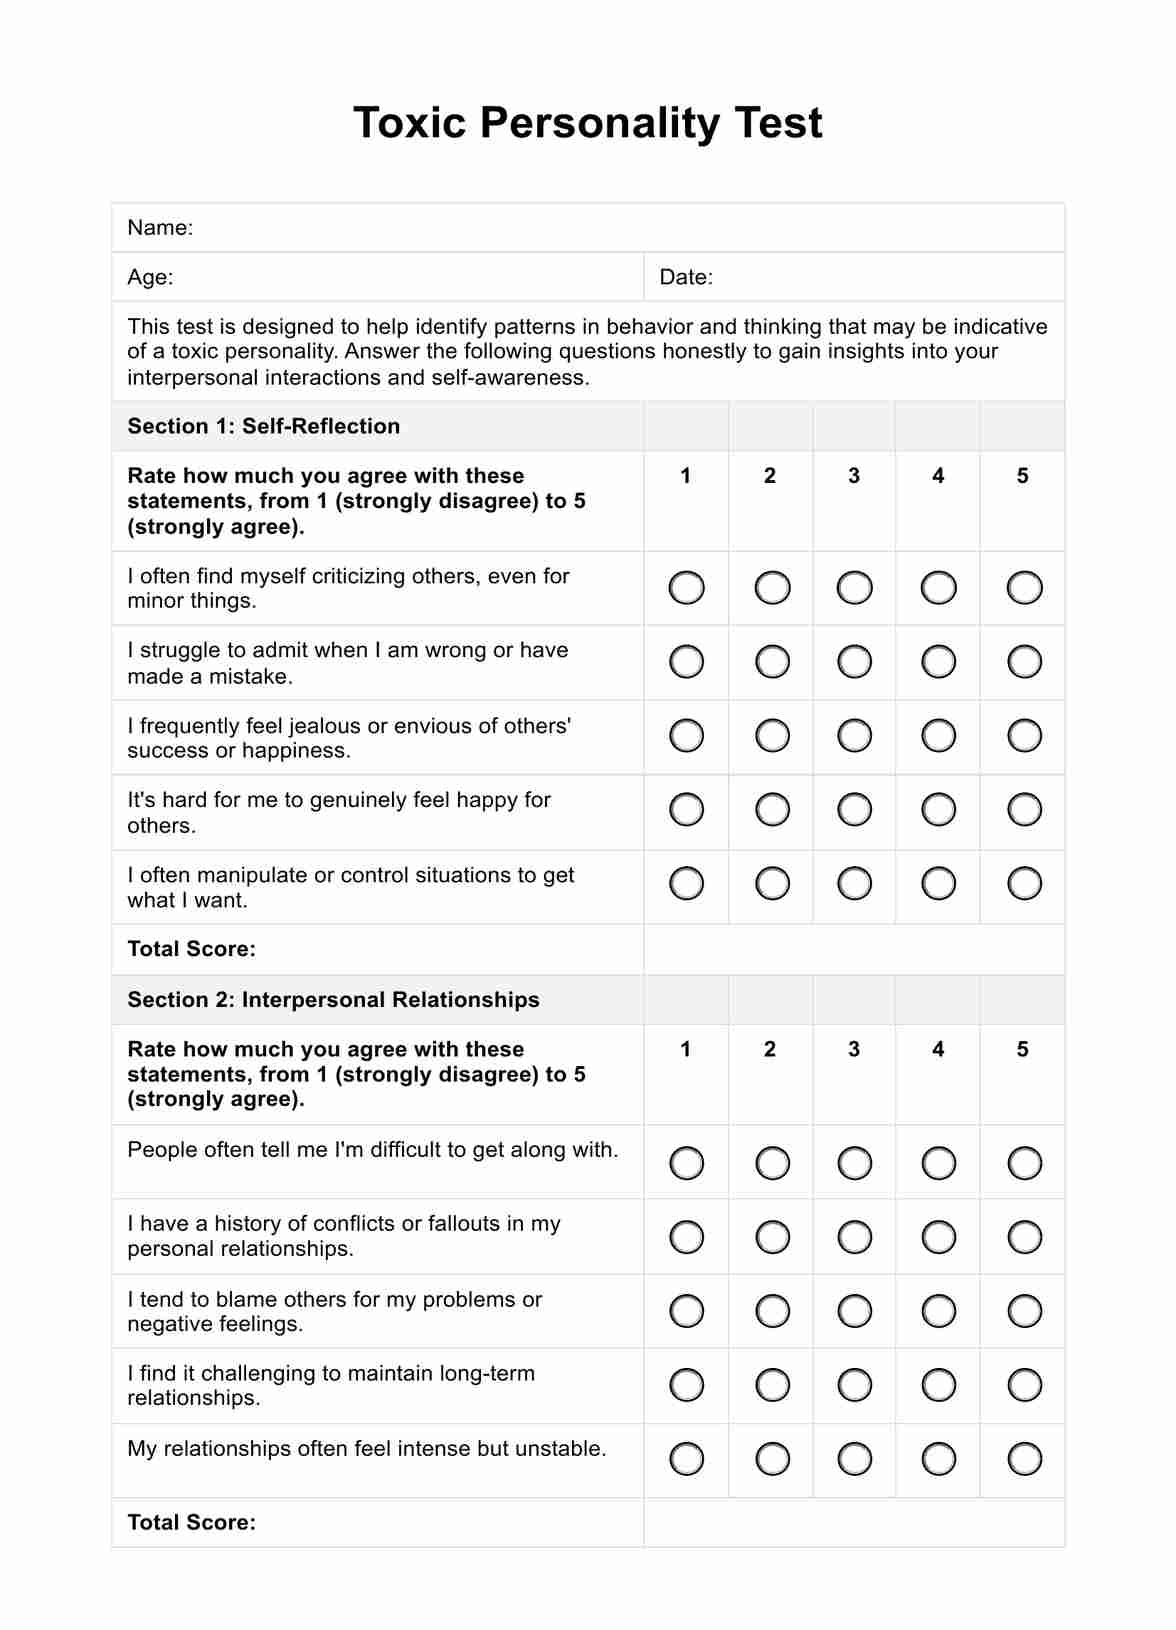 Toxic Personality Test PDF Example